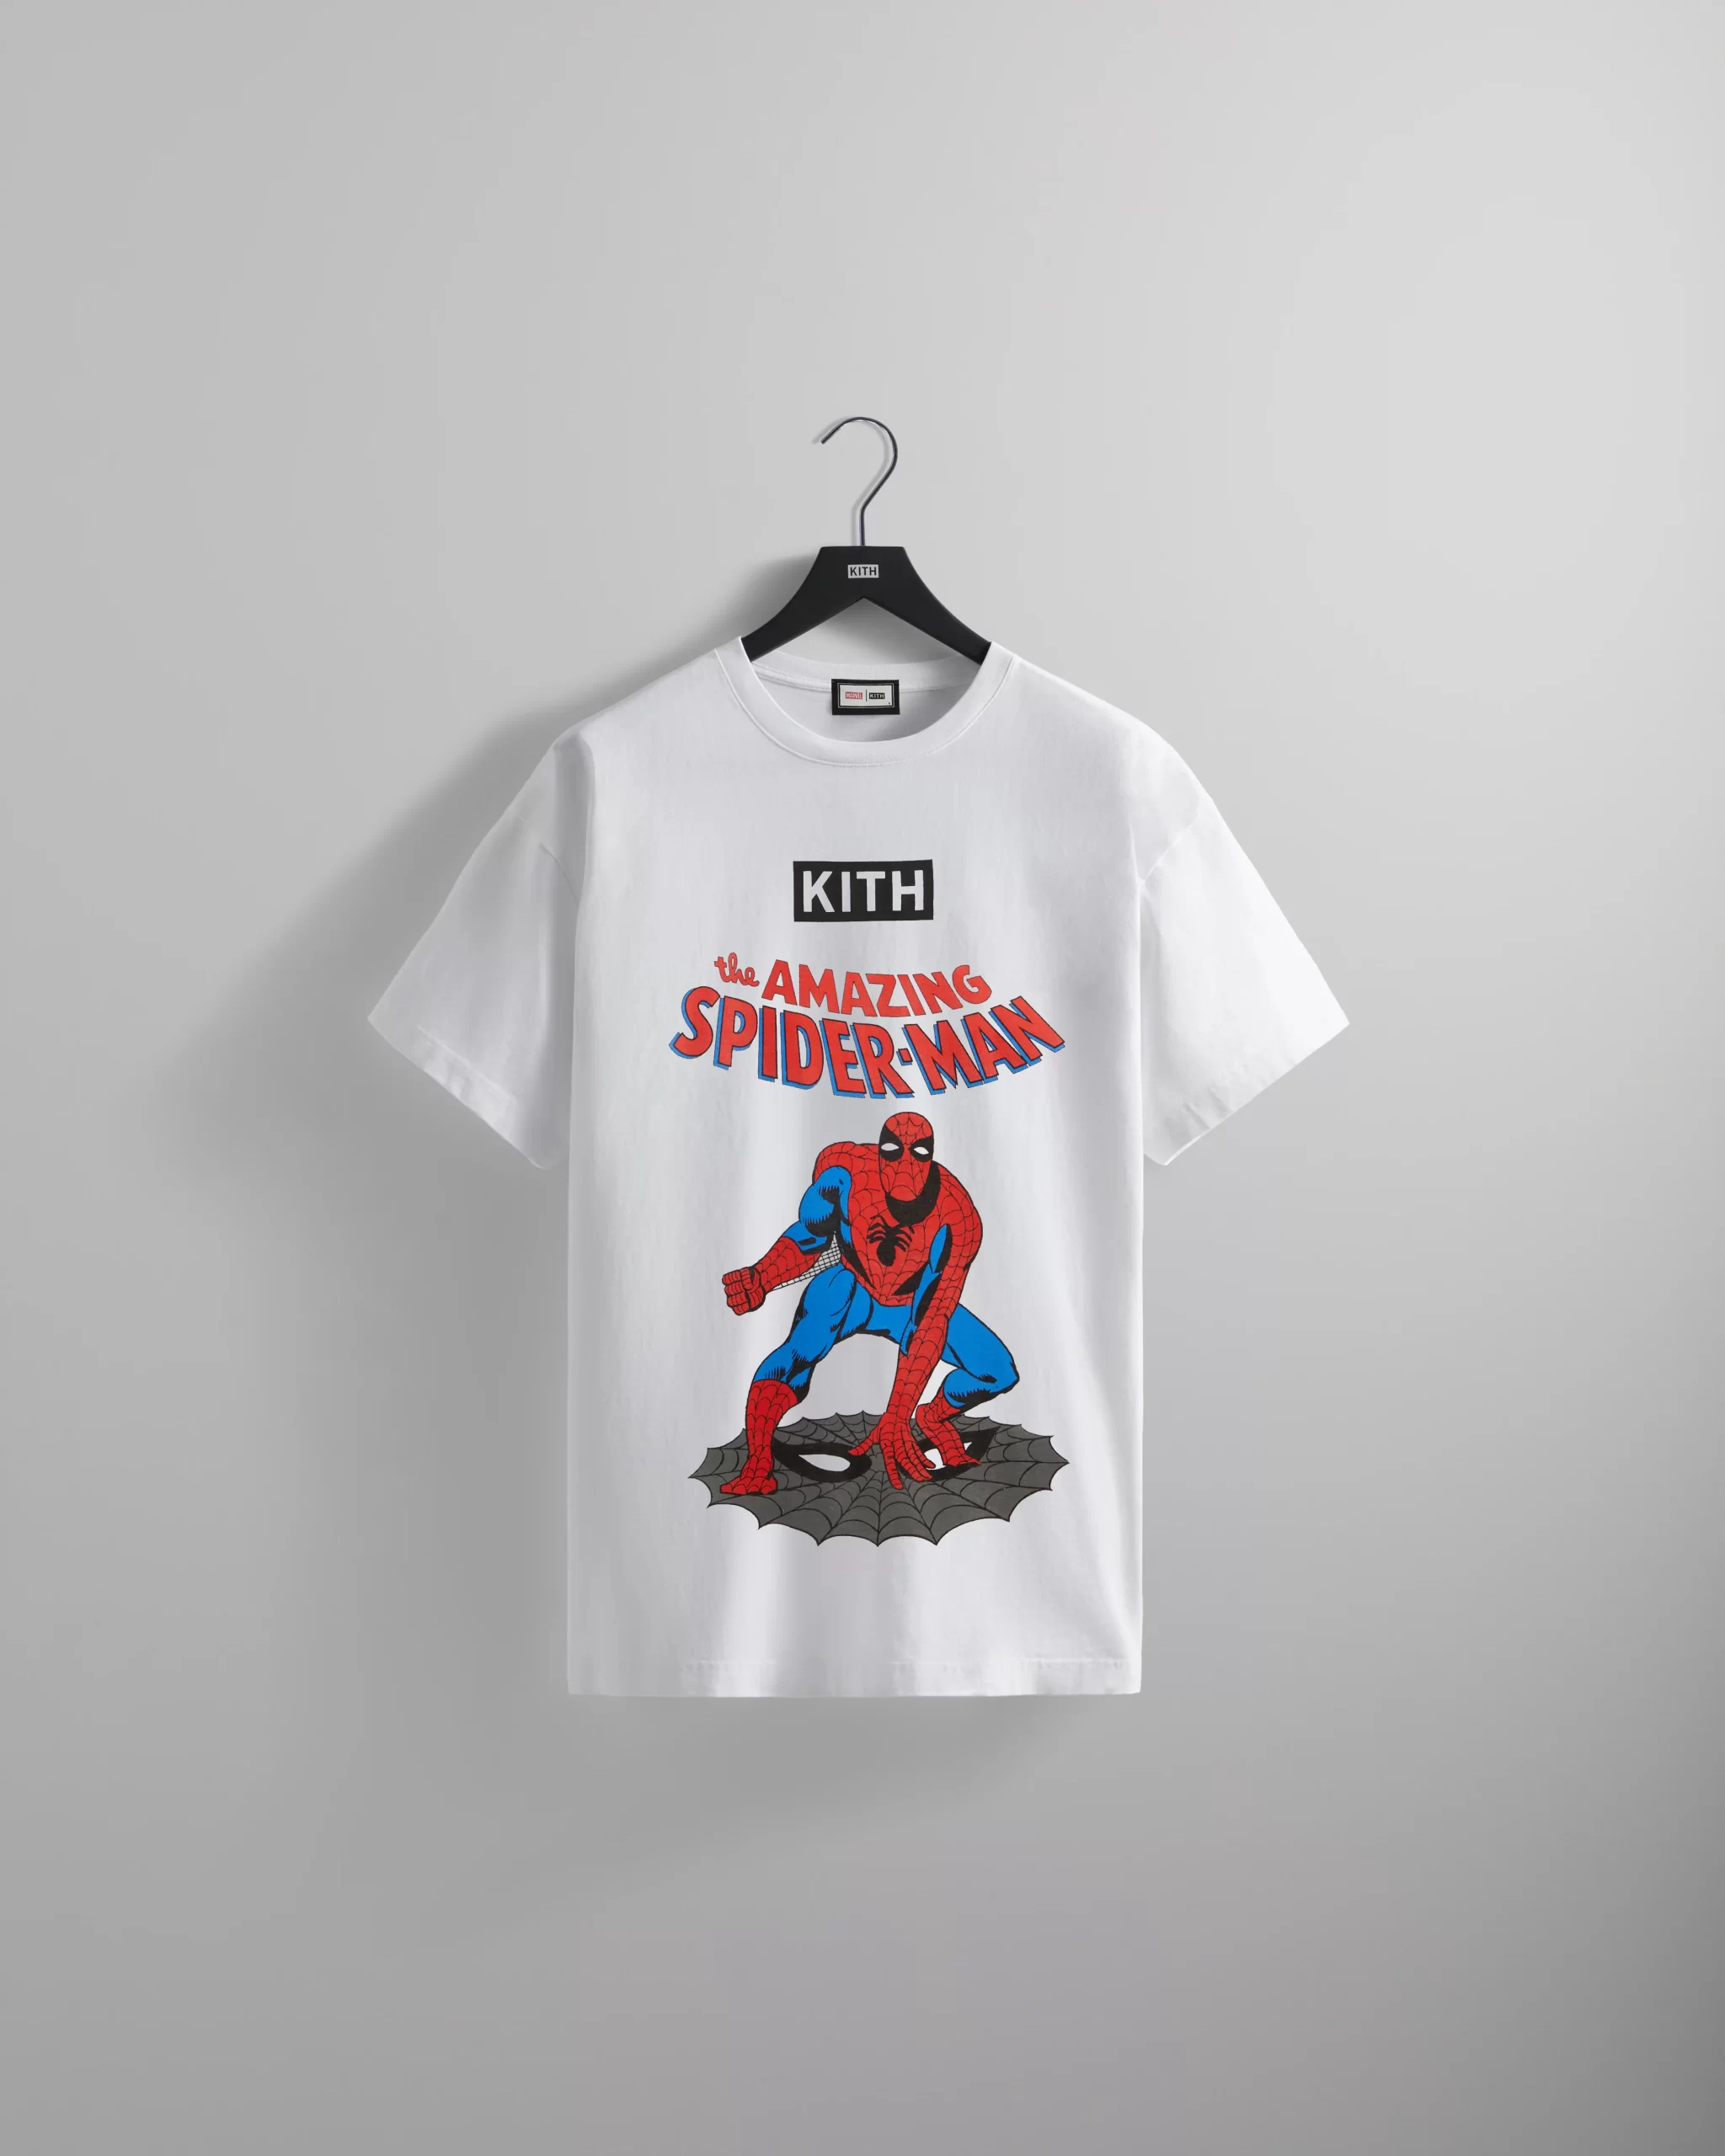 KITH × MARVEL SPIDER-MAN 60TH ANNIVERSARY COLLECTIONが7/15に国内 